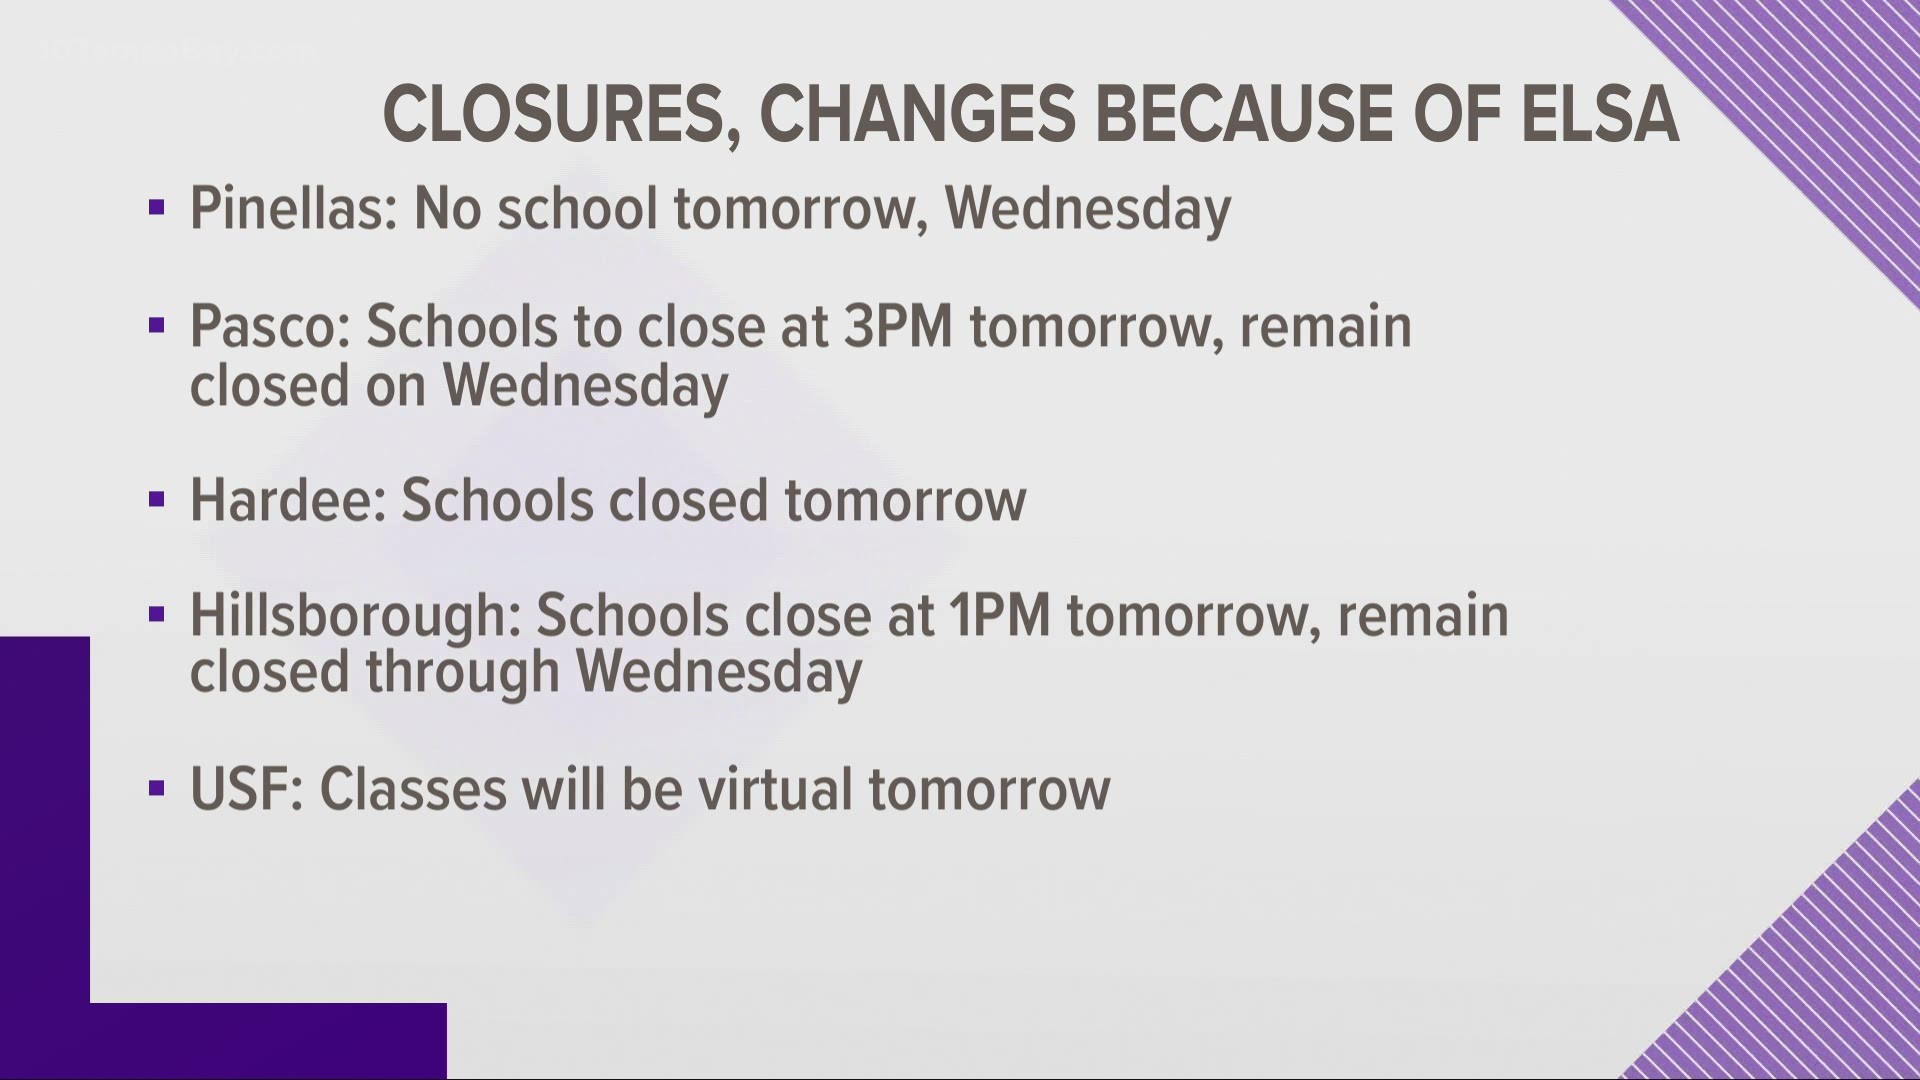 Several schools districts will close or go virtual.